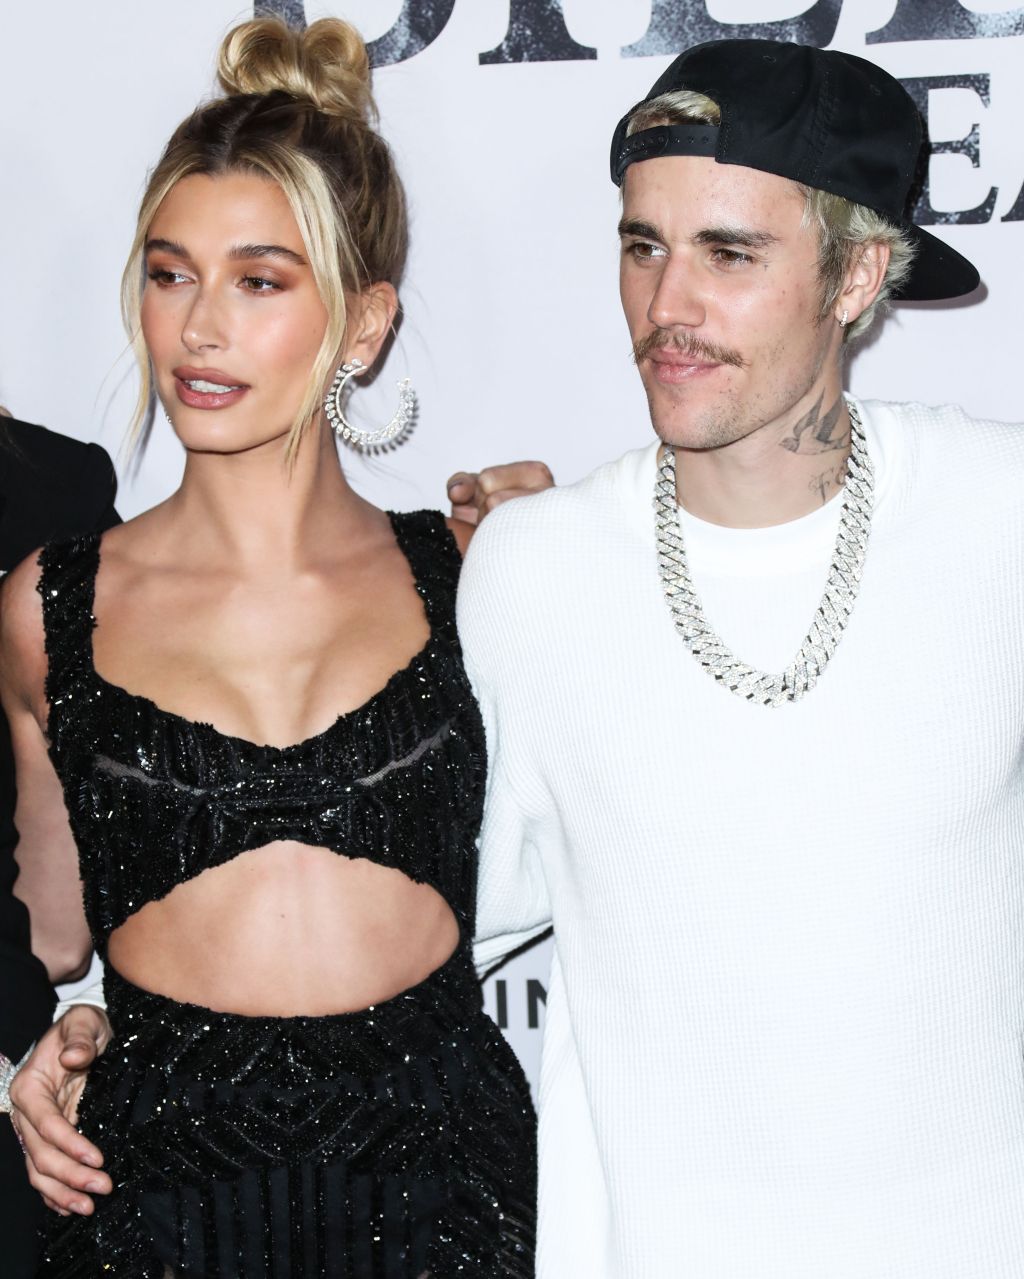 Hailey Rhode Baldwin Bieber and Justin Bieber arrive at the Los Angeles Premiere Of YouTube Originals&apos; &apos;Justin Bieber: Seasons&apos; held at the Regency Bruin Theatre on January 27, 2020 in Westwood, Los Angeles, California, United States.